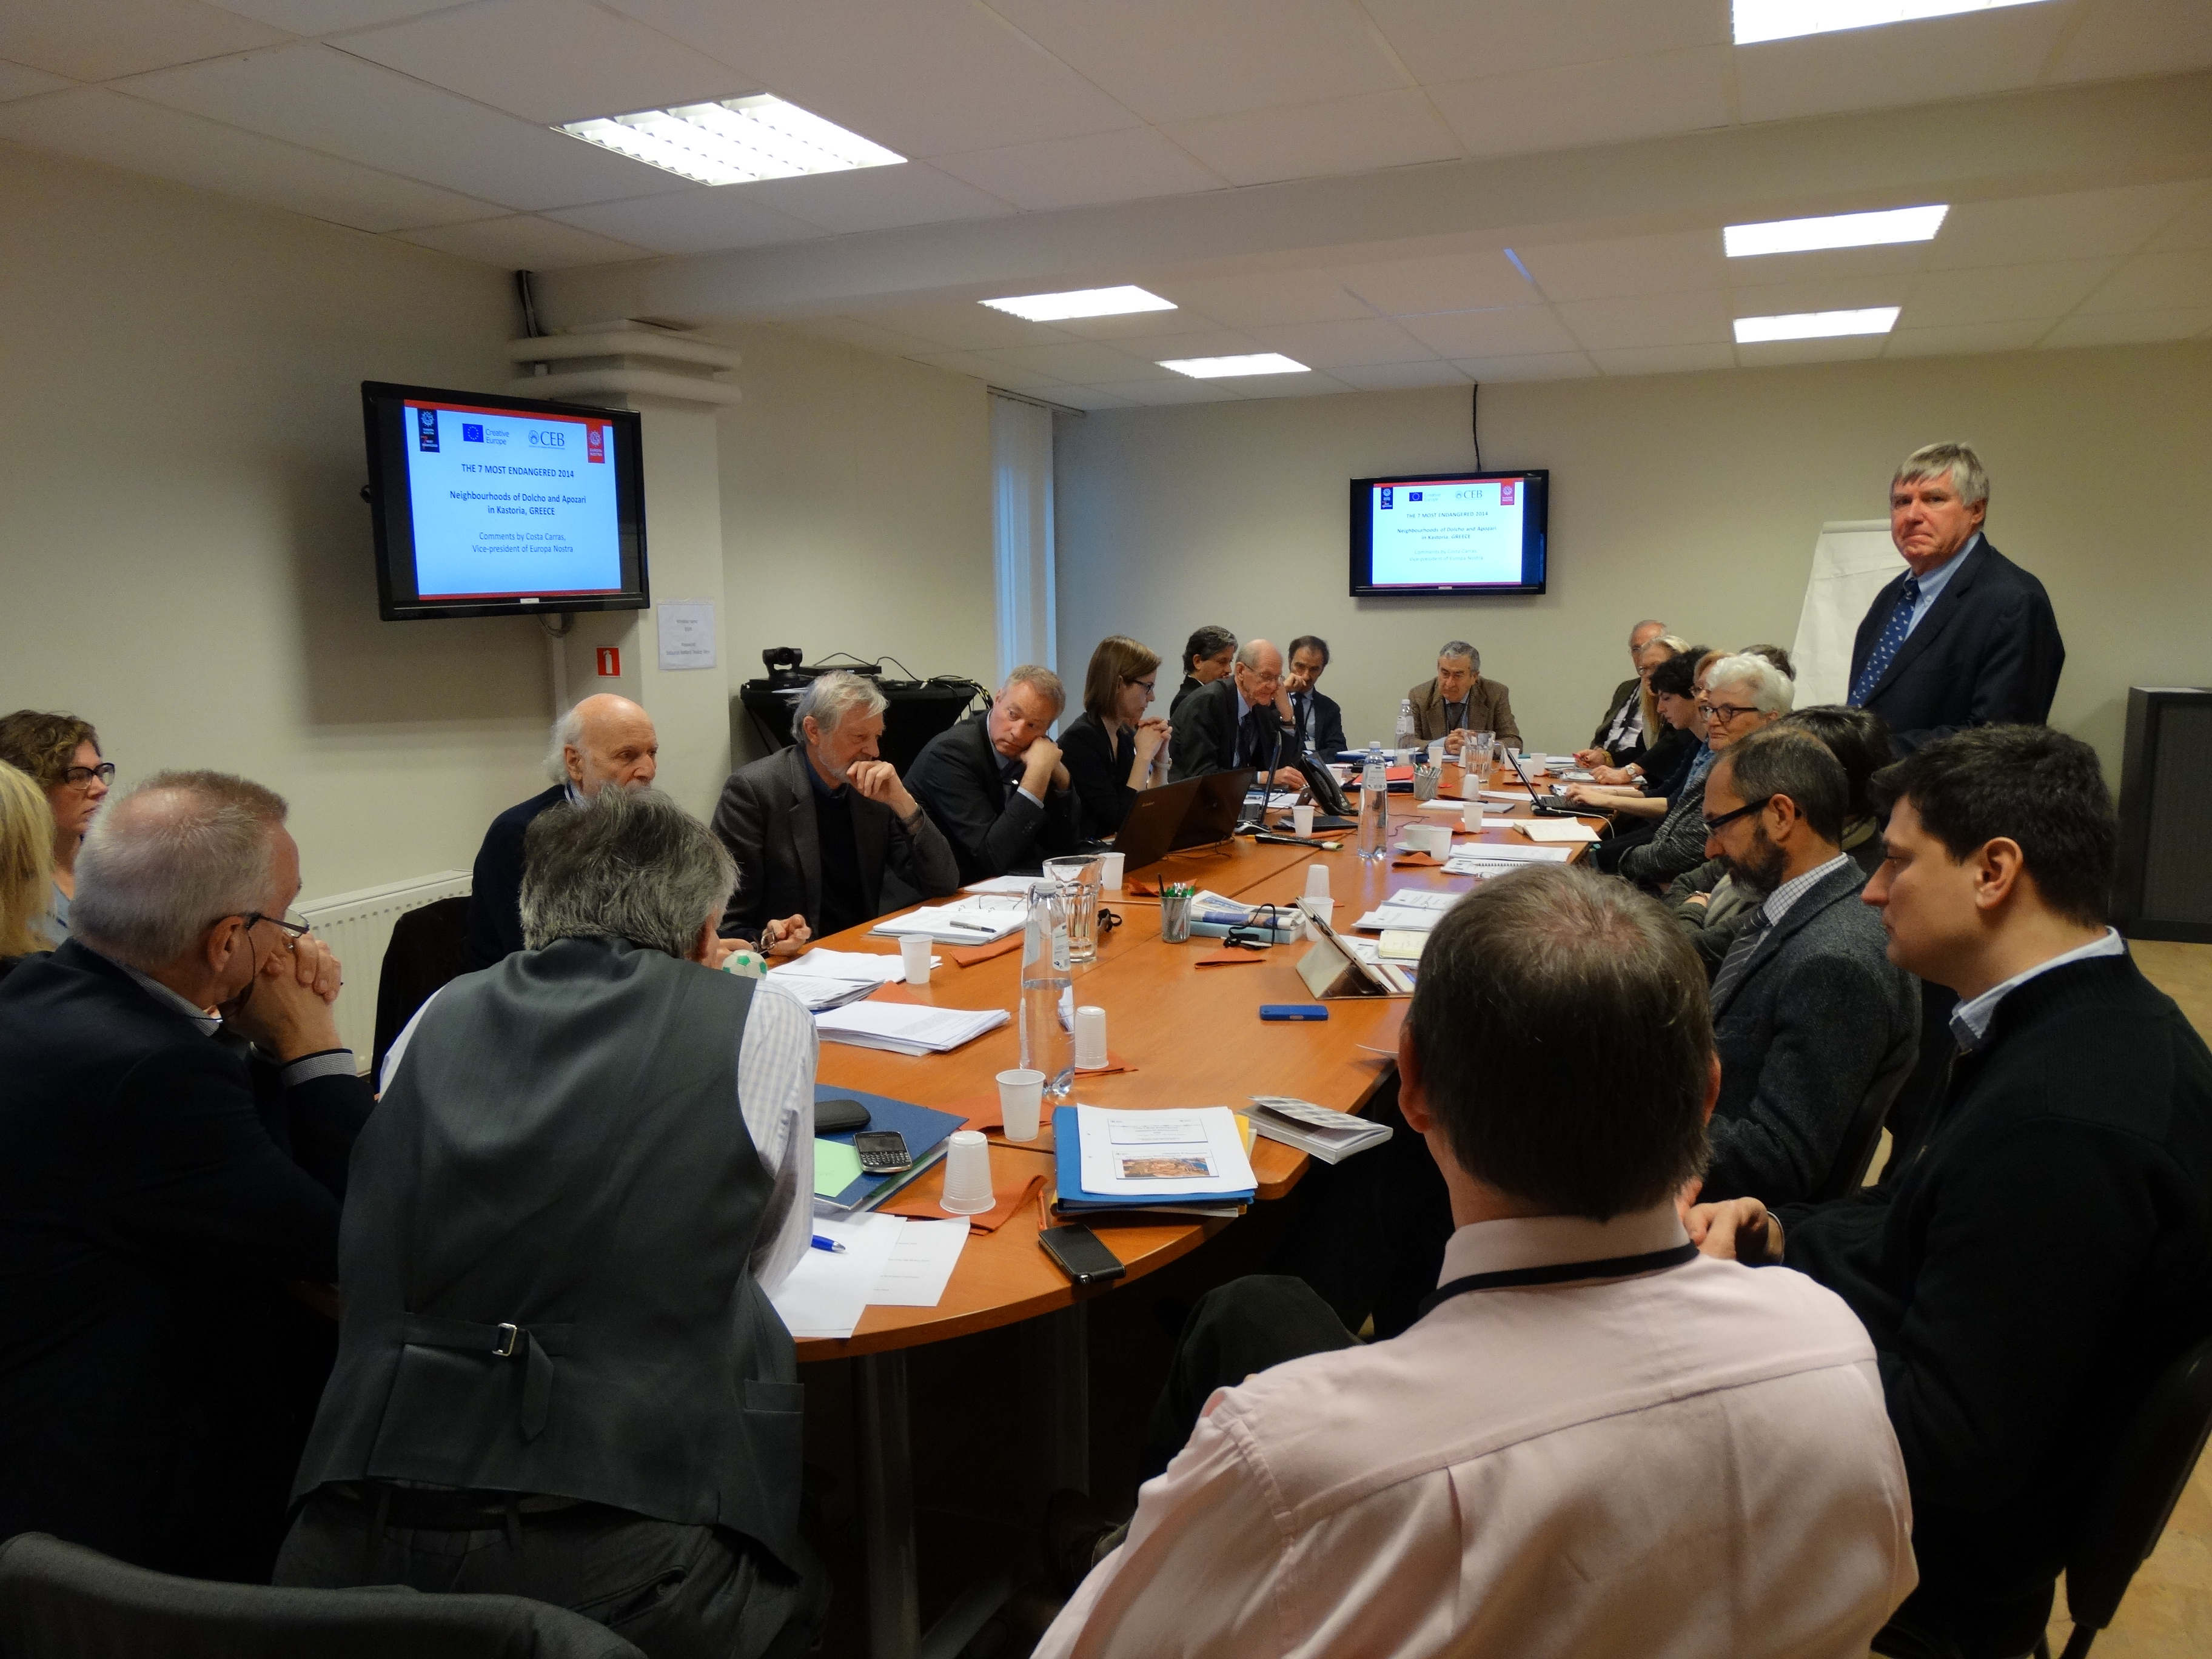 Representatives from Europa Nostra, EIB Institute and CEB discussed the results of the visits to ‘The 7 Most Endangered’ sites 2014 in Brussels on 20 February 2015. Photo: Europa Nostra